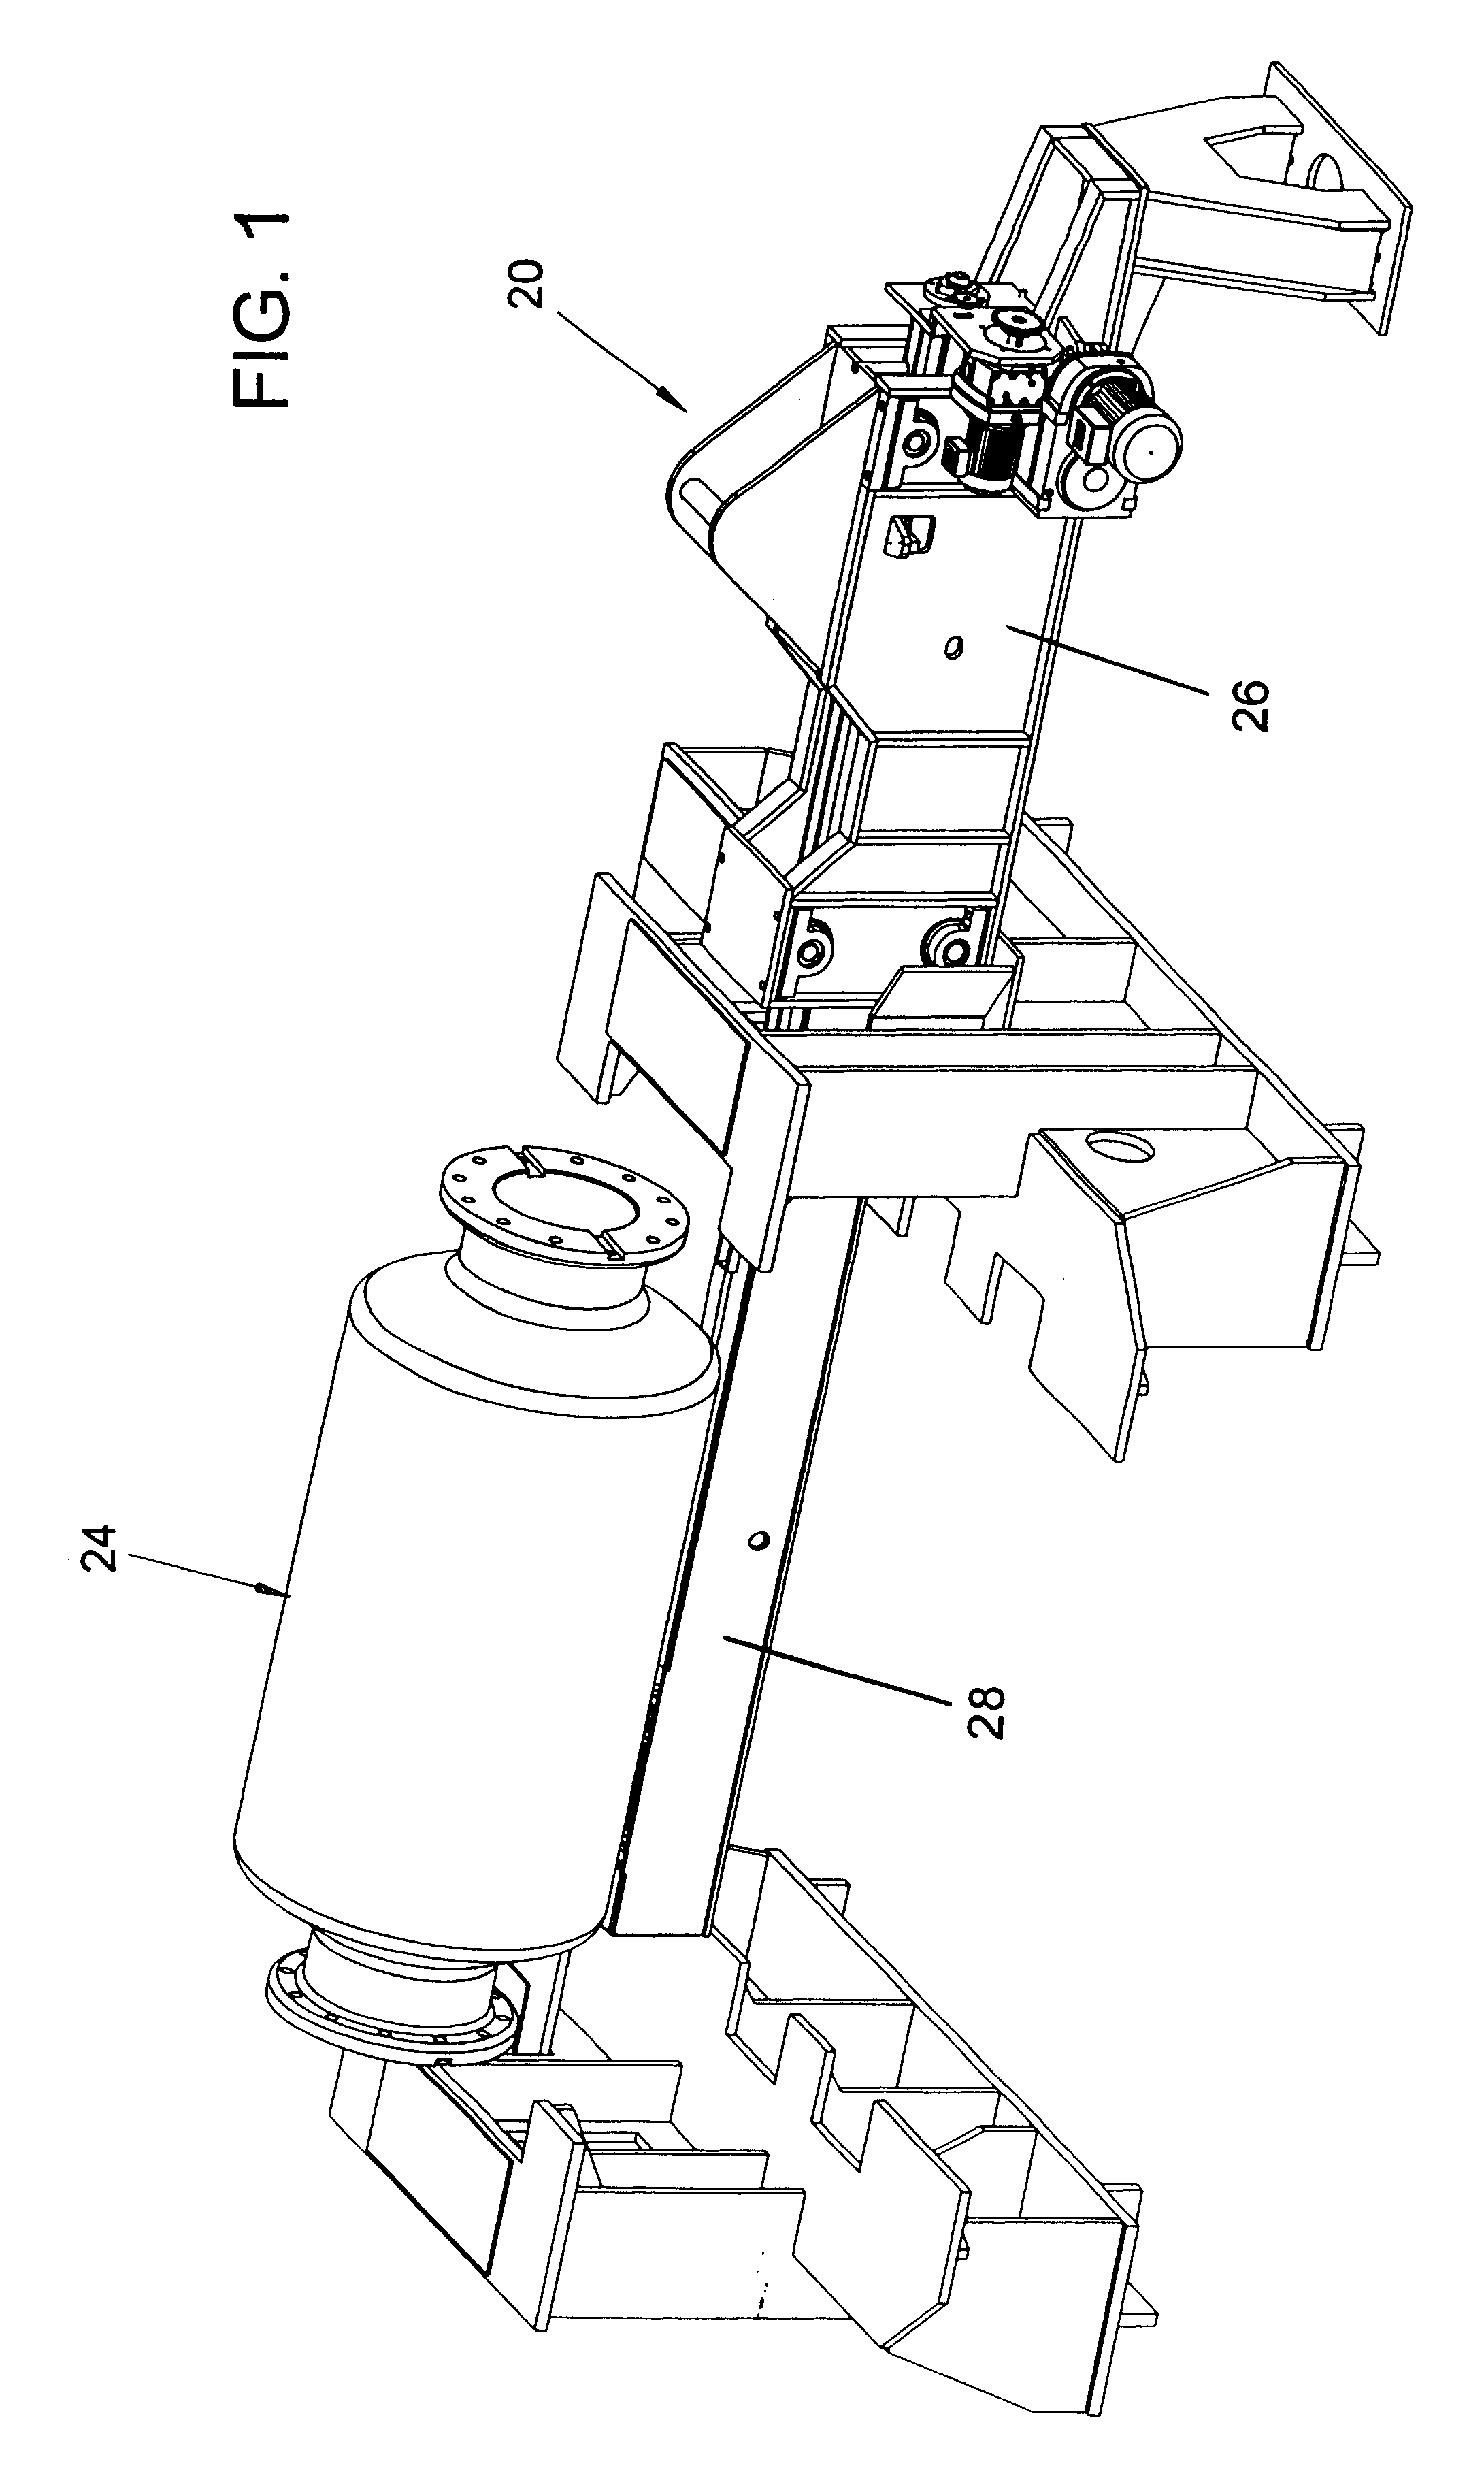 Apparatus for cleaning a coiler furnace drum